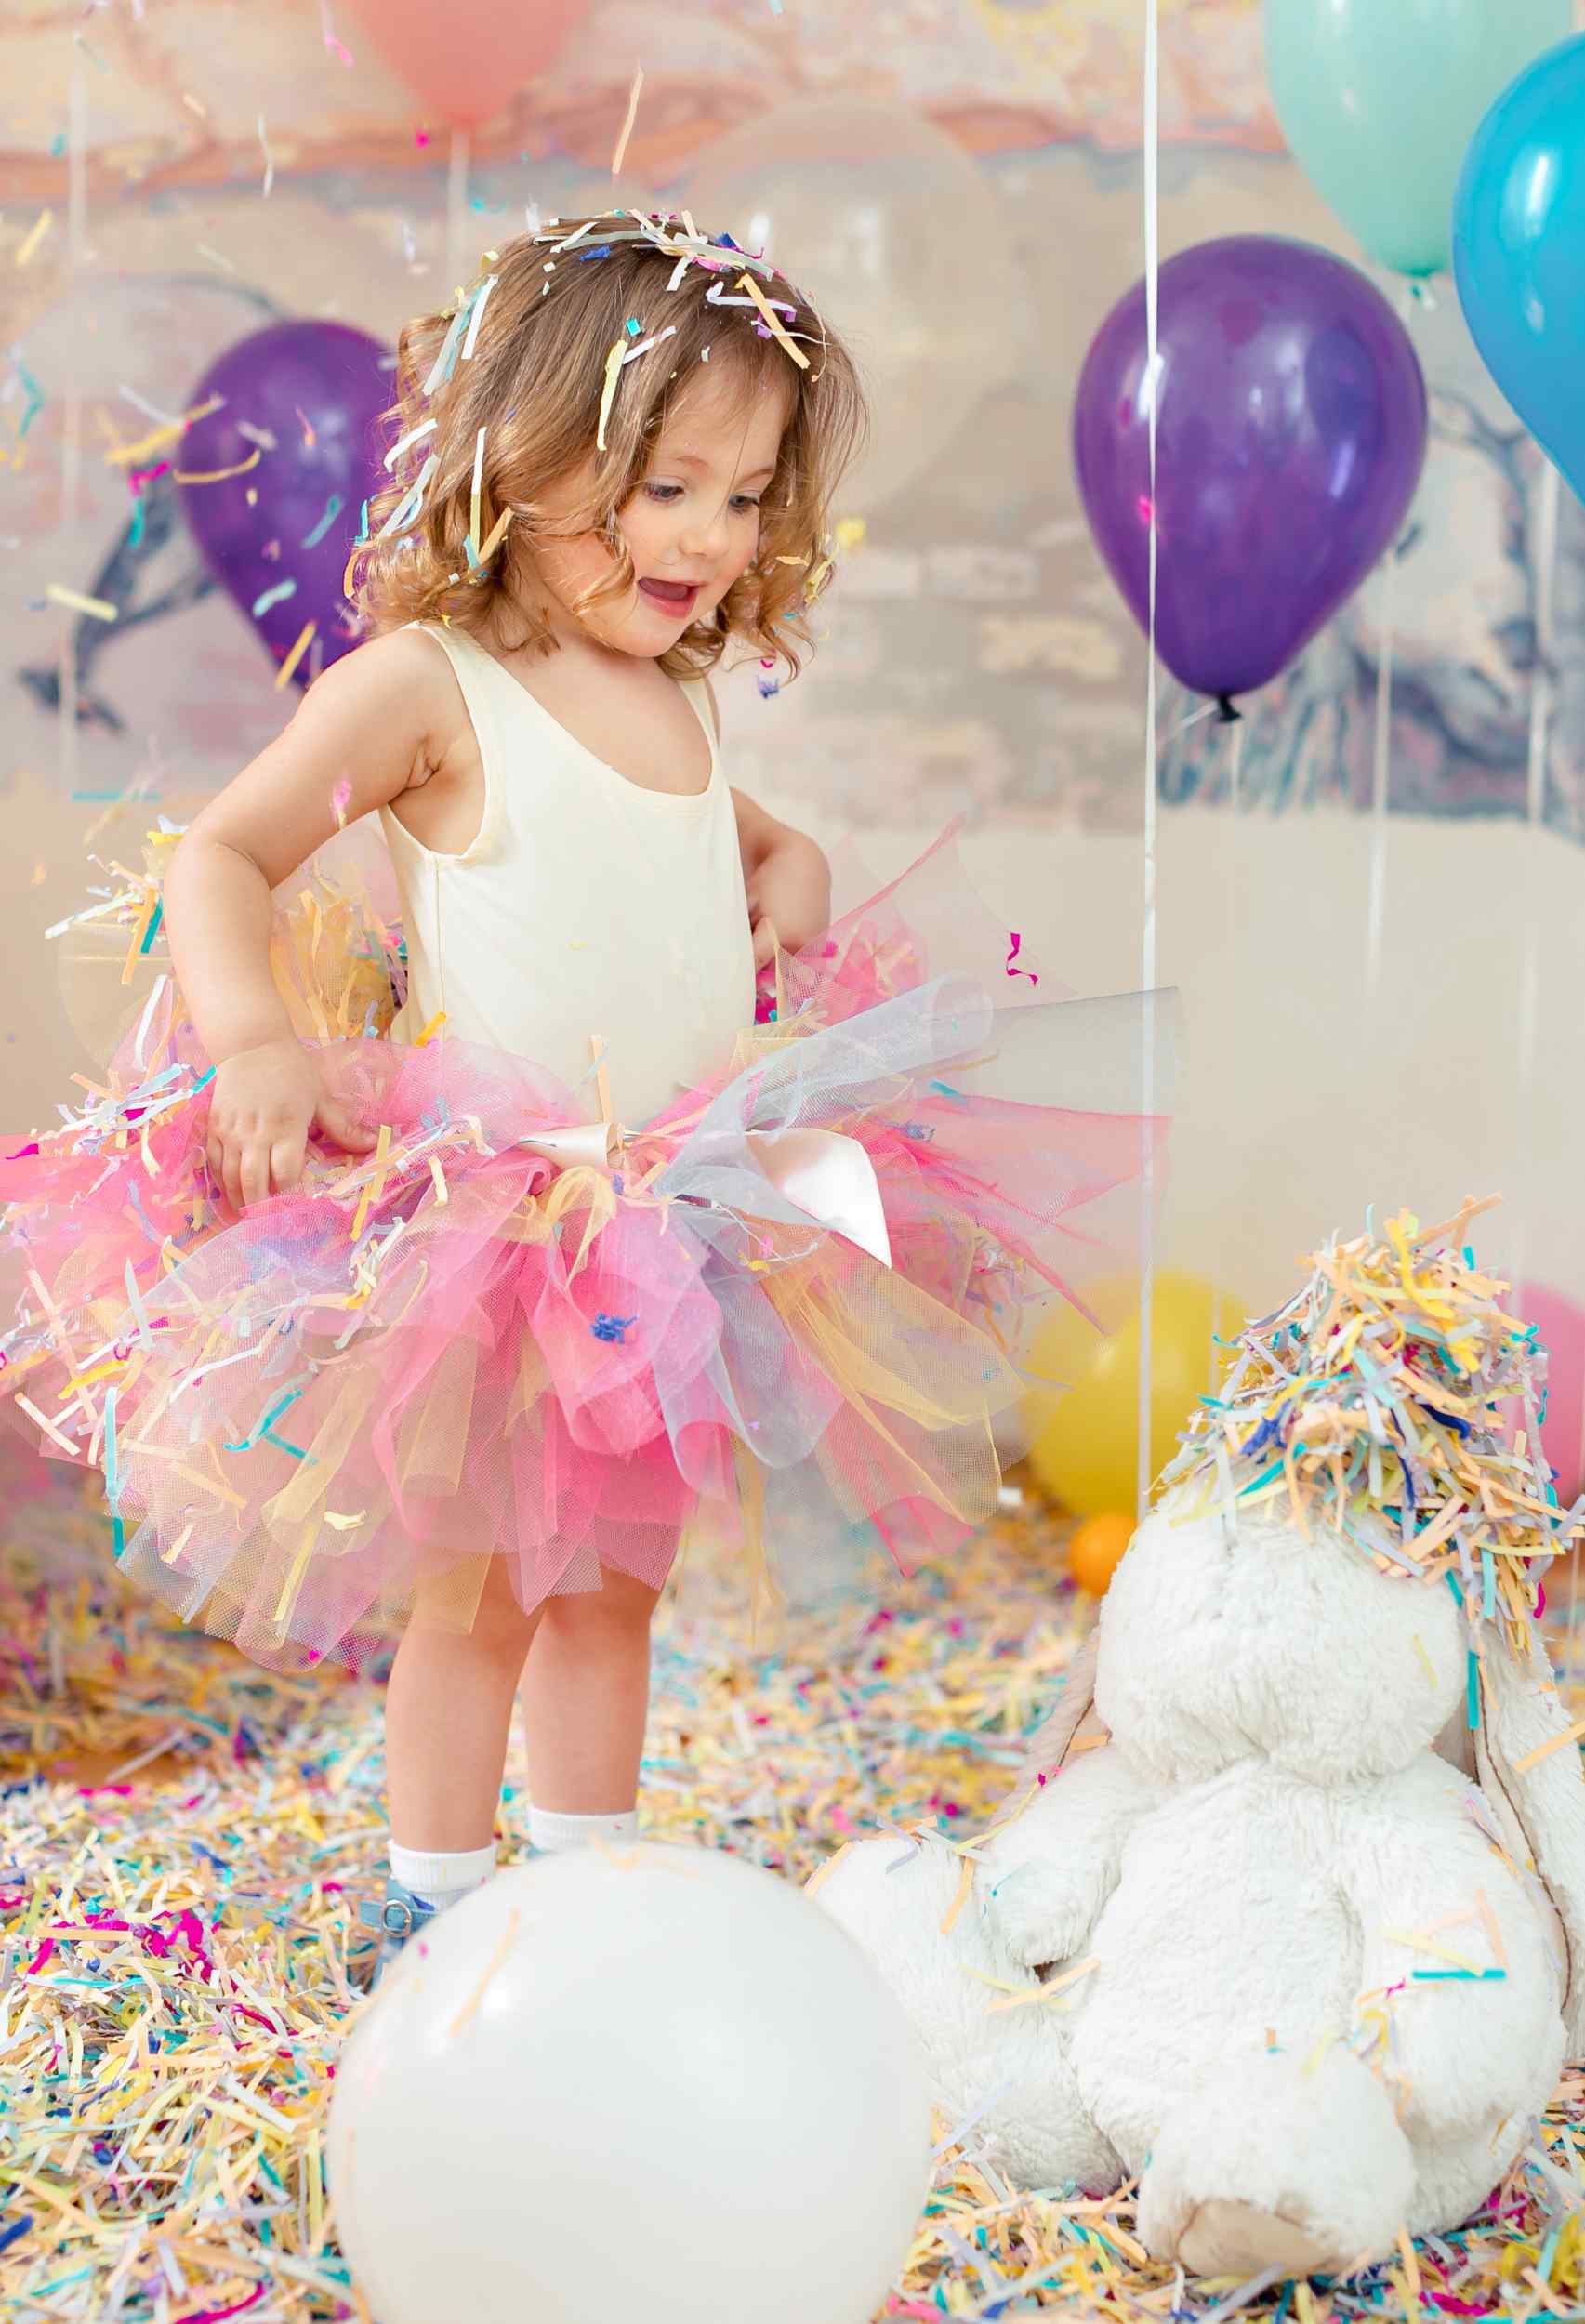 Creative Decoration Ideas to Elevate Your Kid's Party Experience